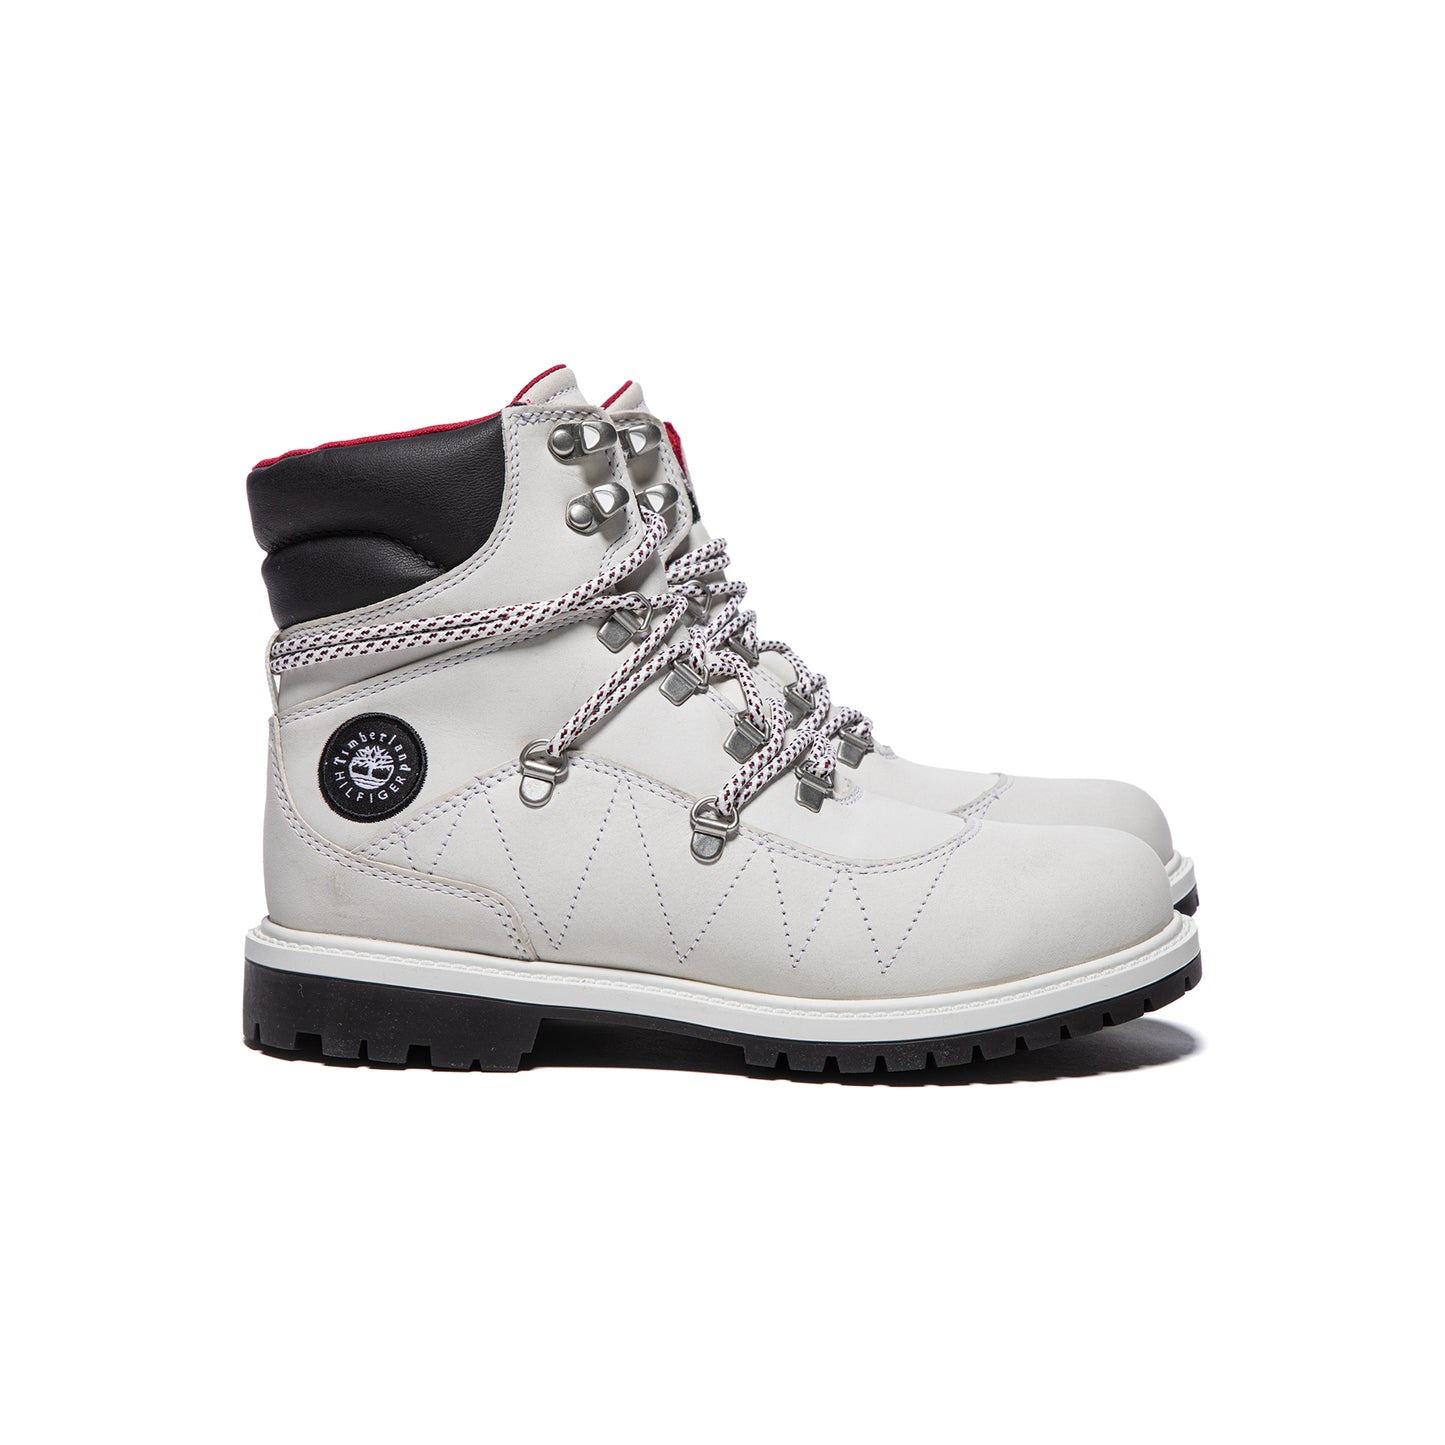 Tommy Hilfiger x Timberland Reimagined Womens 6" Boot (White)